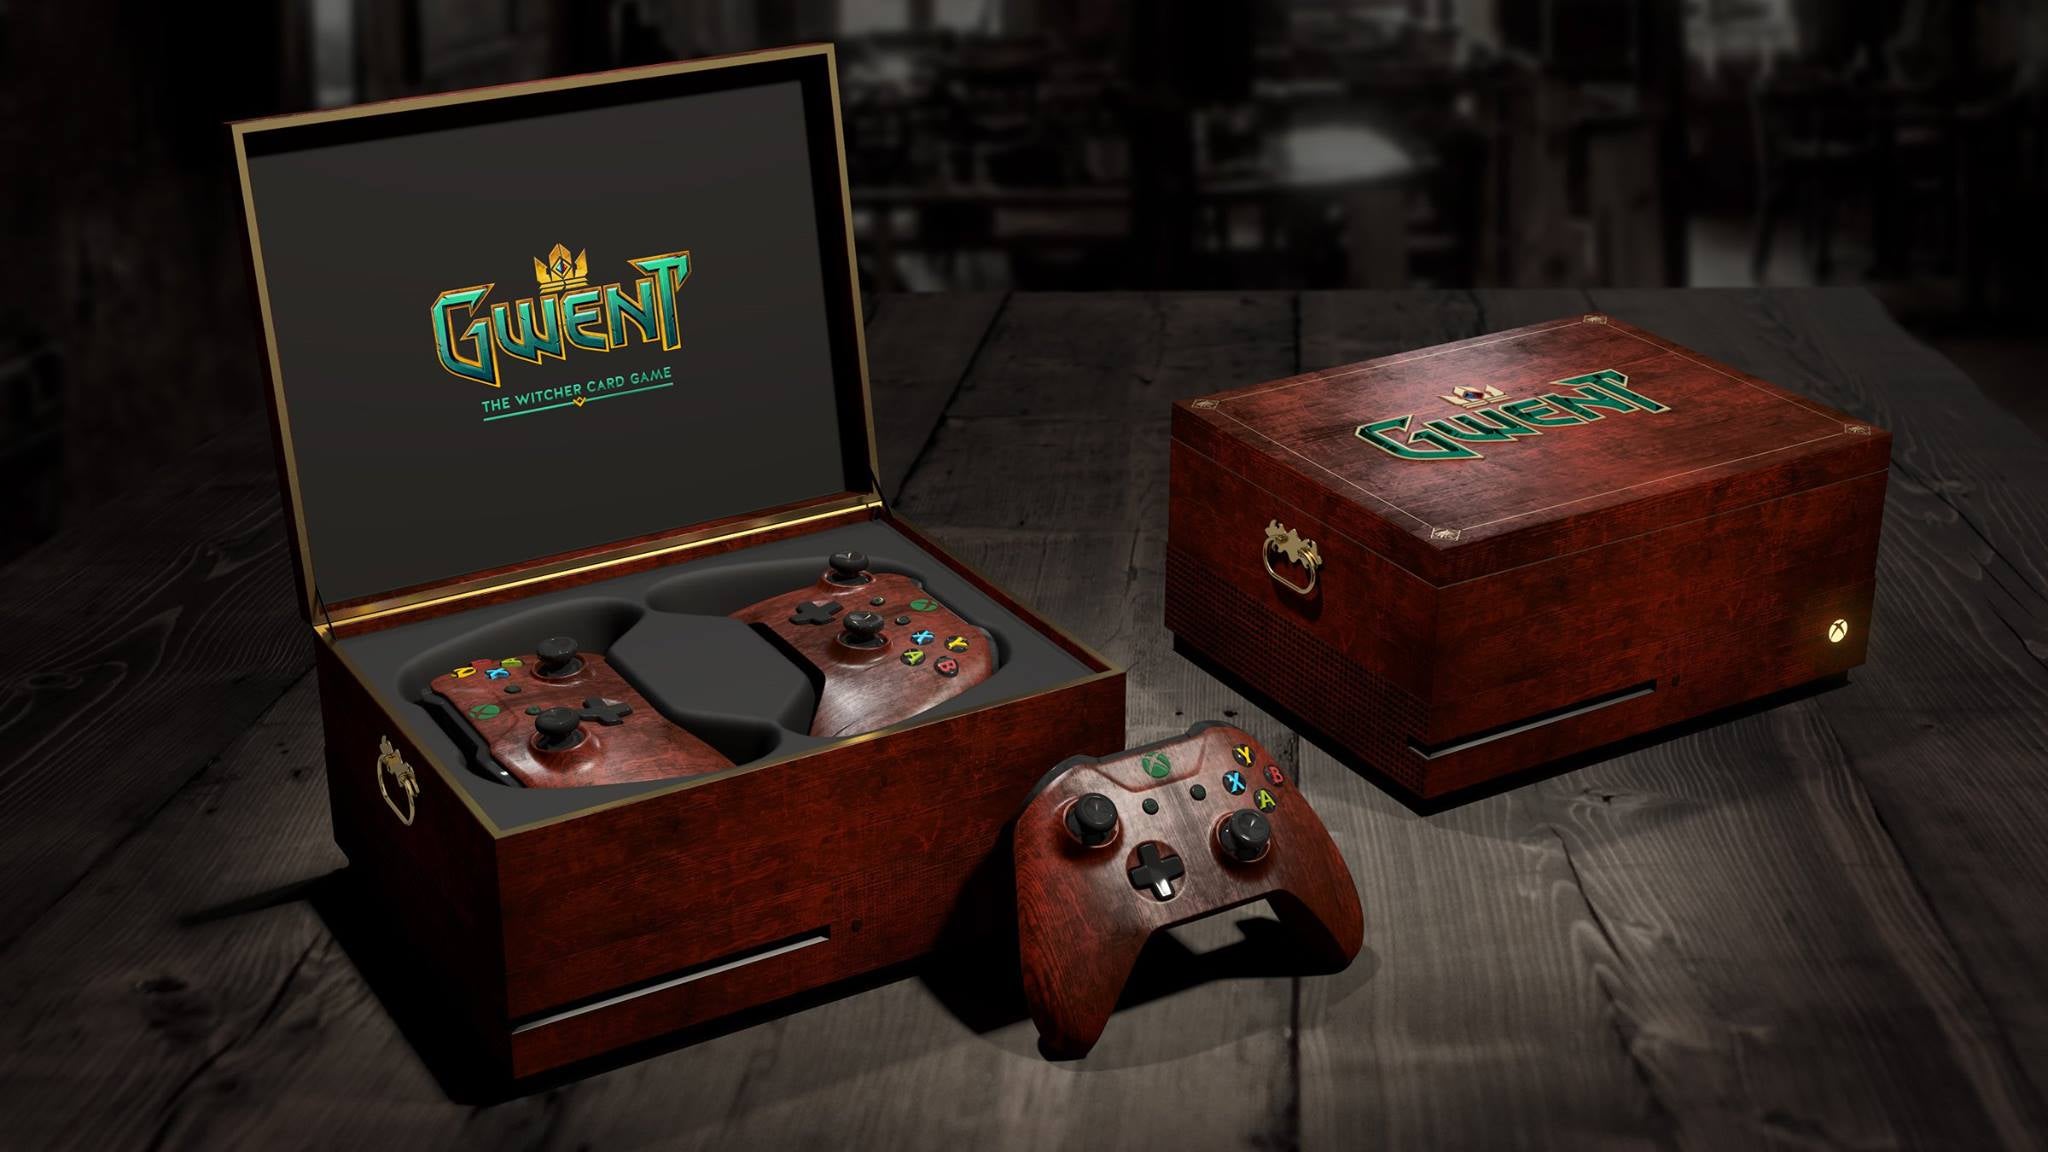 Image for Gwent: The Witcher Card Game-themed Xbox One up for grabs from Xbox UK